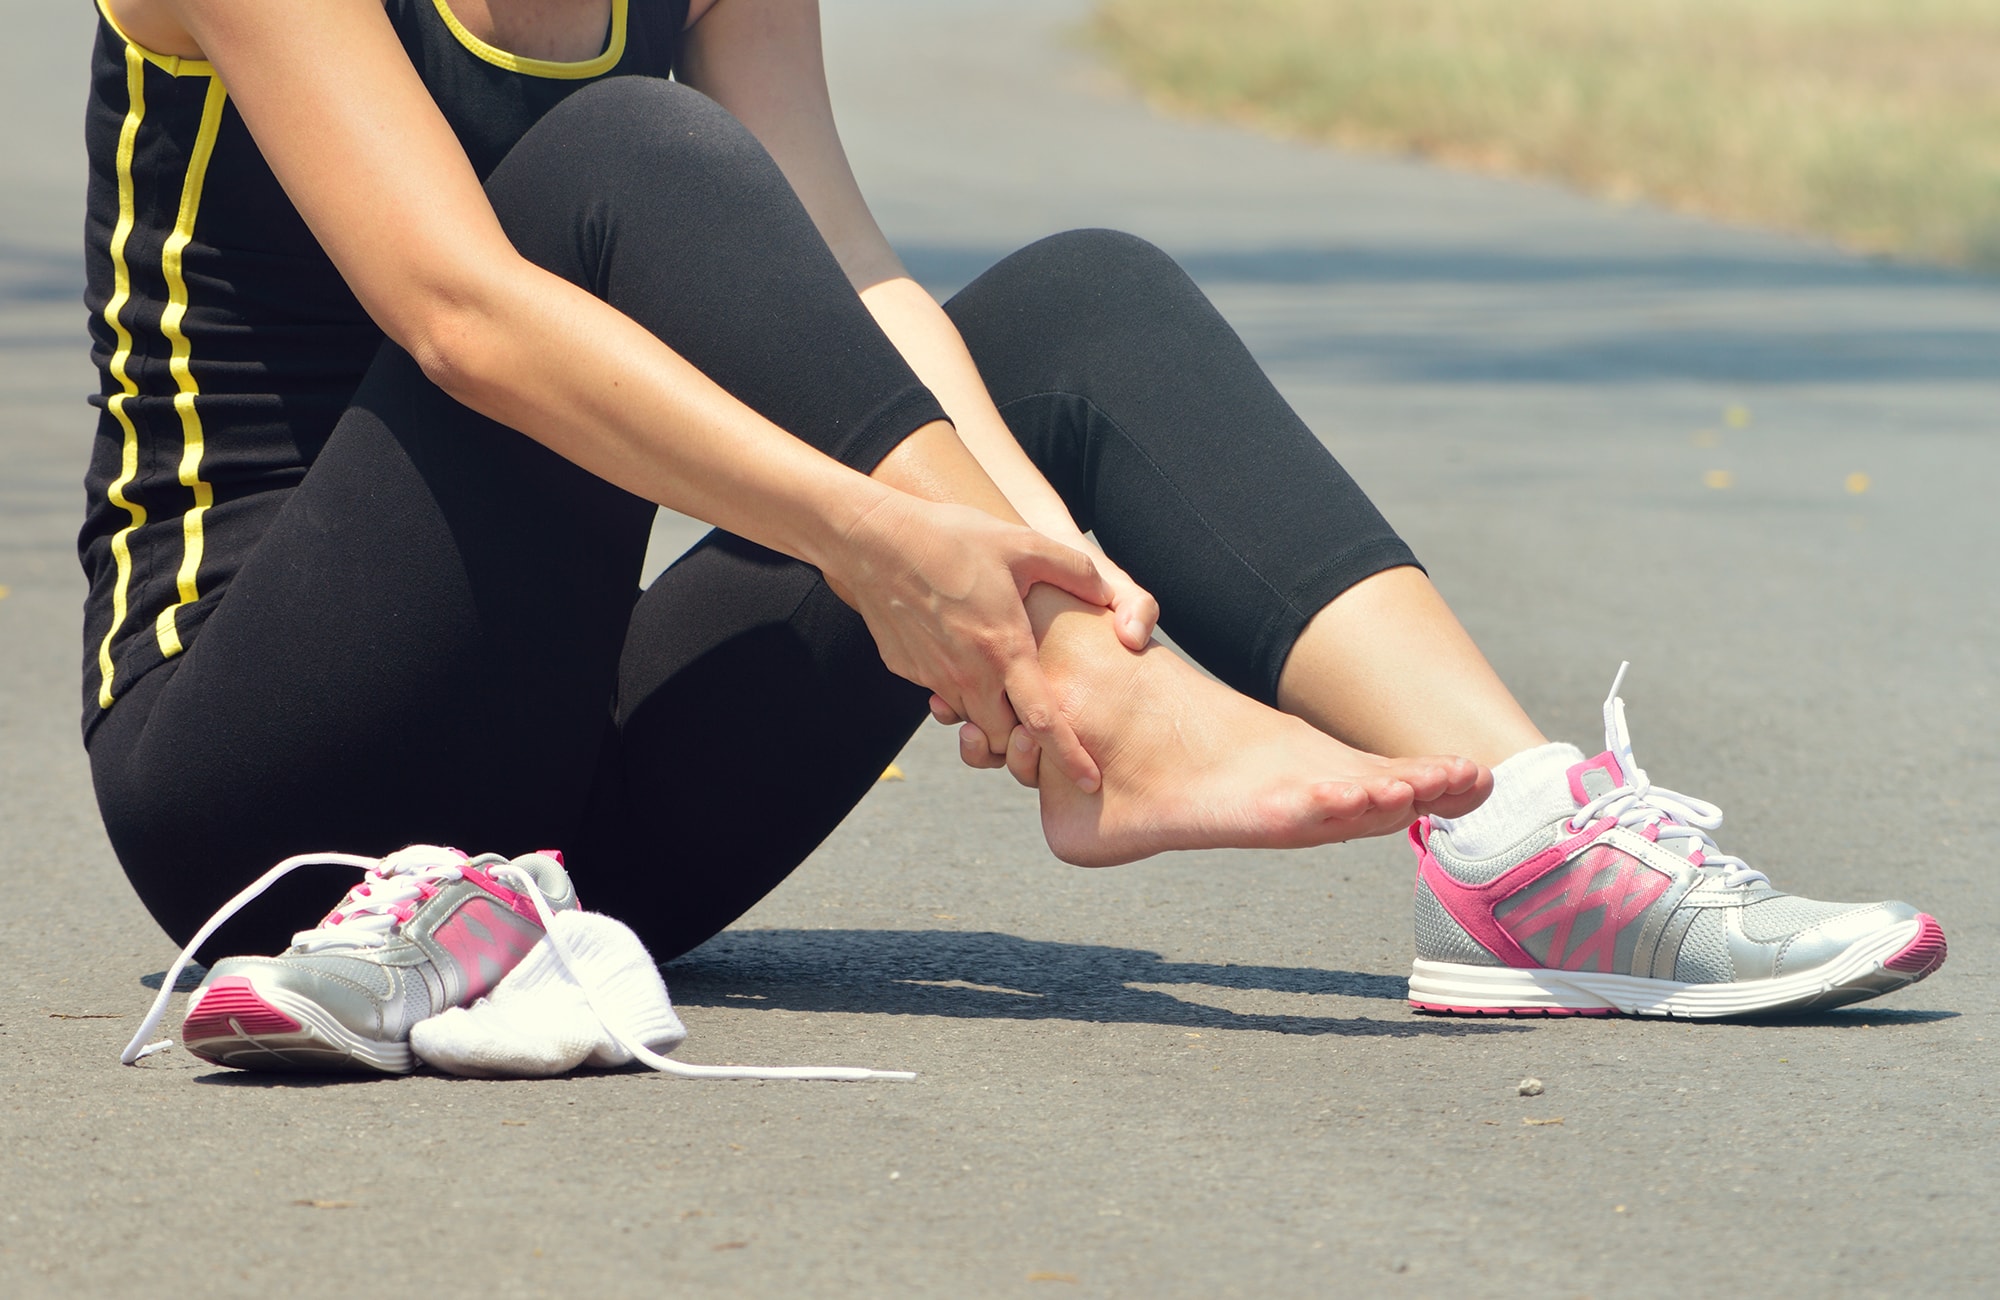 Heel pain: Causes, symptoms and treatment | OrthoIndy Blog